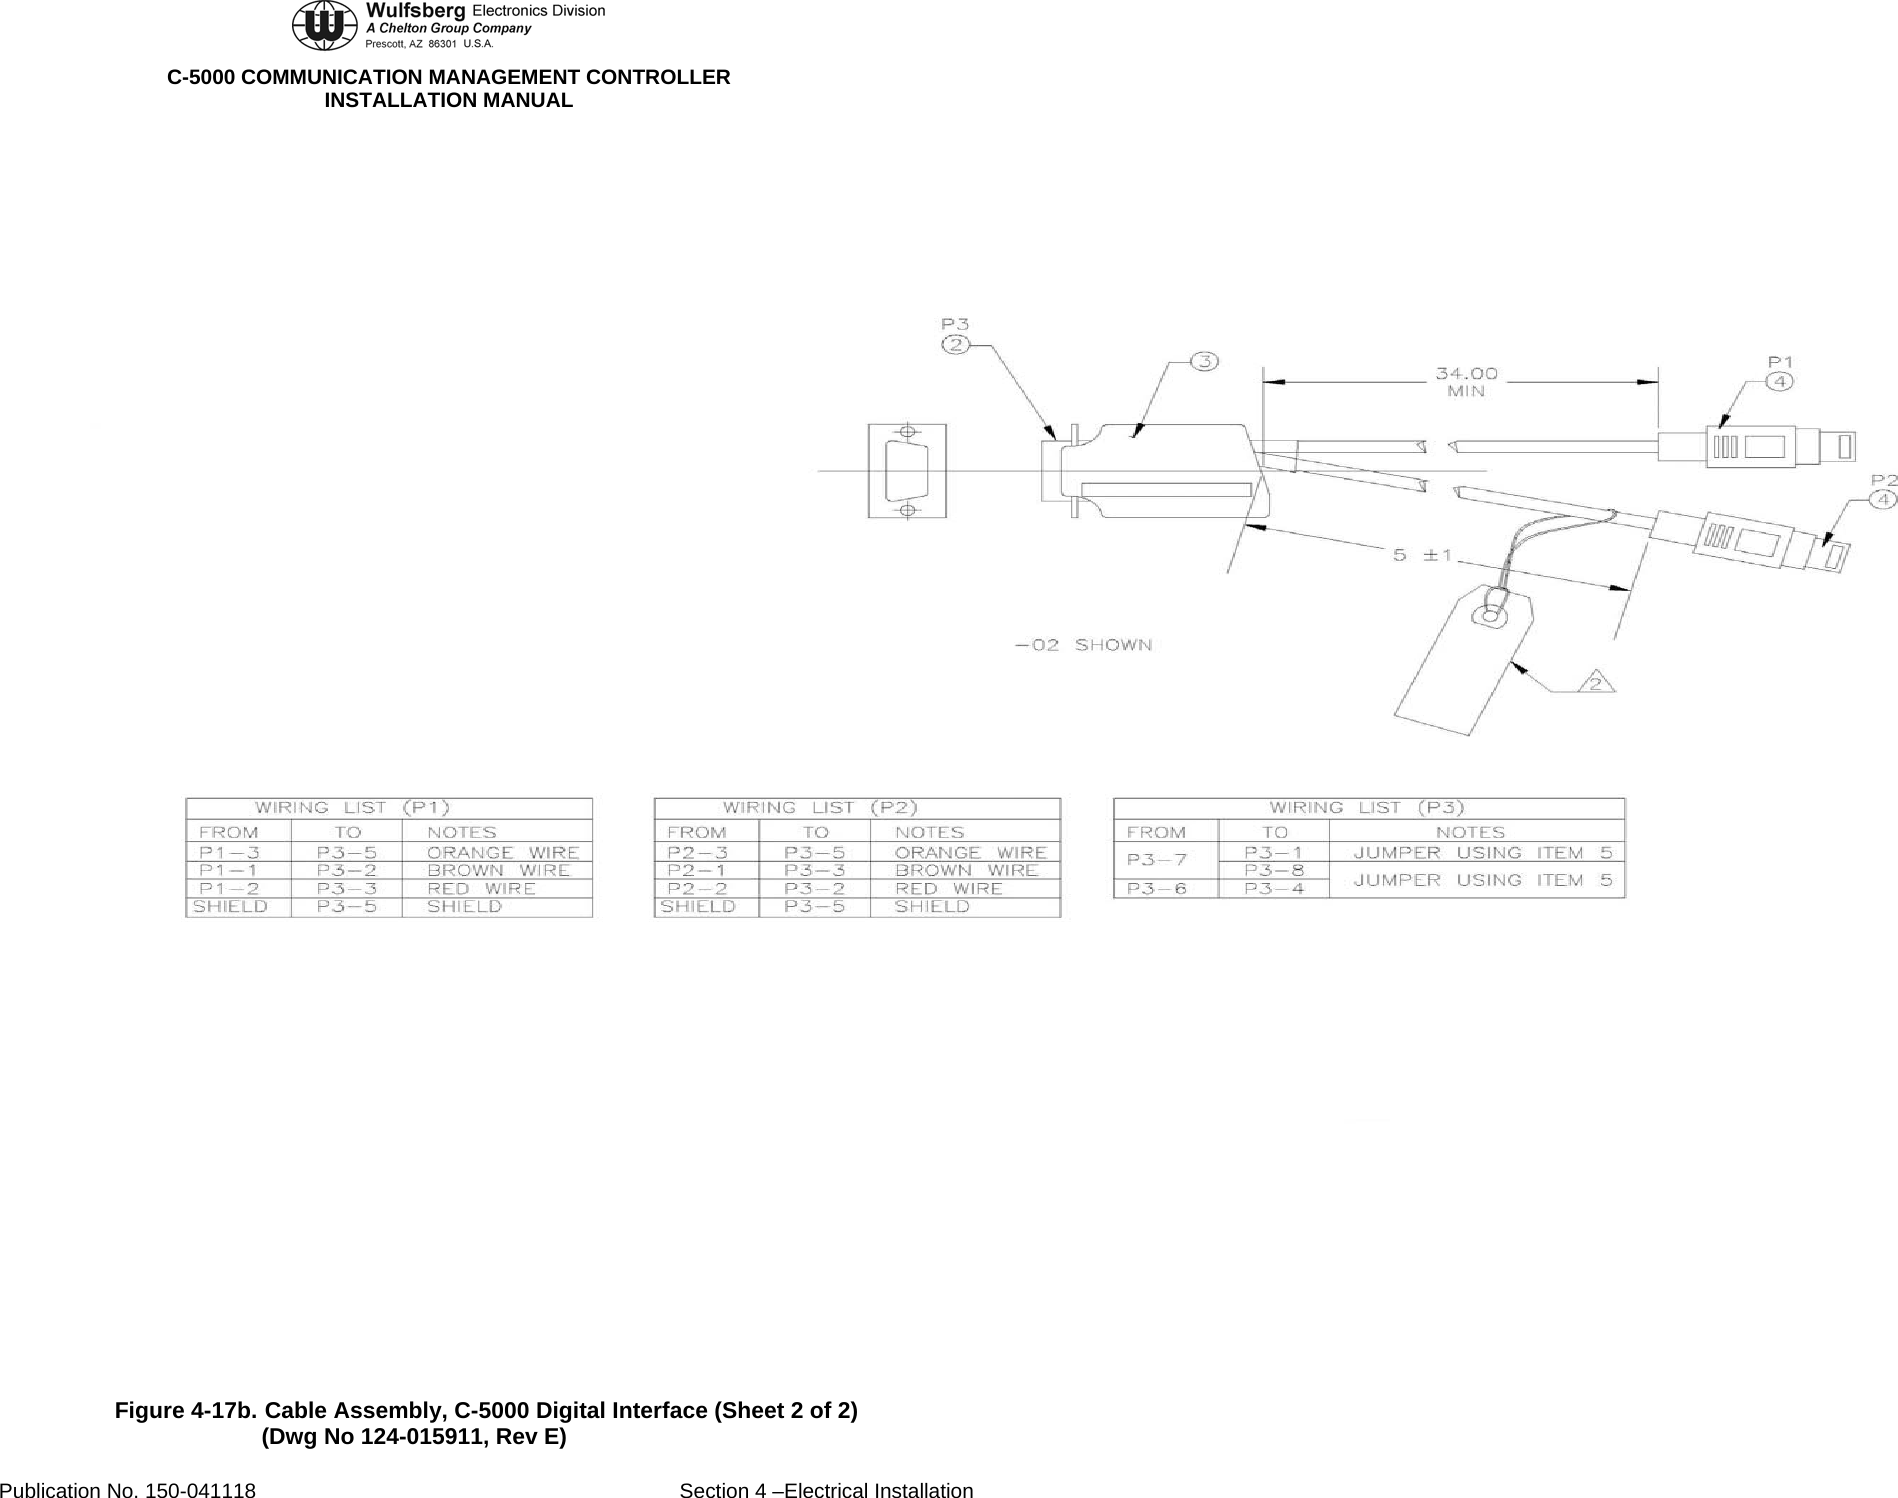  C-5000 COMMUNICATION MANAGEMENT CONTROLLER INSTALLATION MANUAL  Figure 4-17b. Cable Assembly, C-5000 Digital Interface (Sheet 2 of 2) (Dwg No 124-015911, Rev E) Publication No. 150-041118  Section 4 –Electrical Installation 